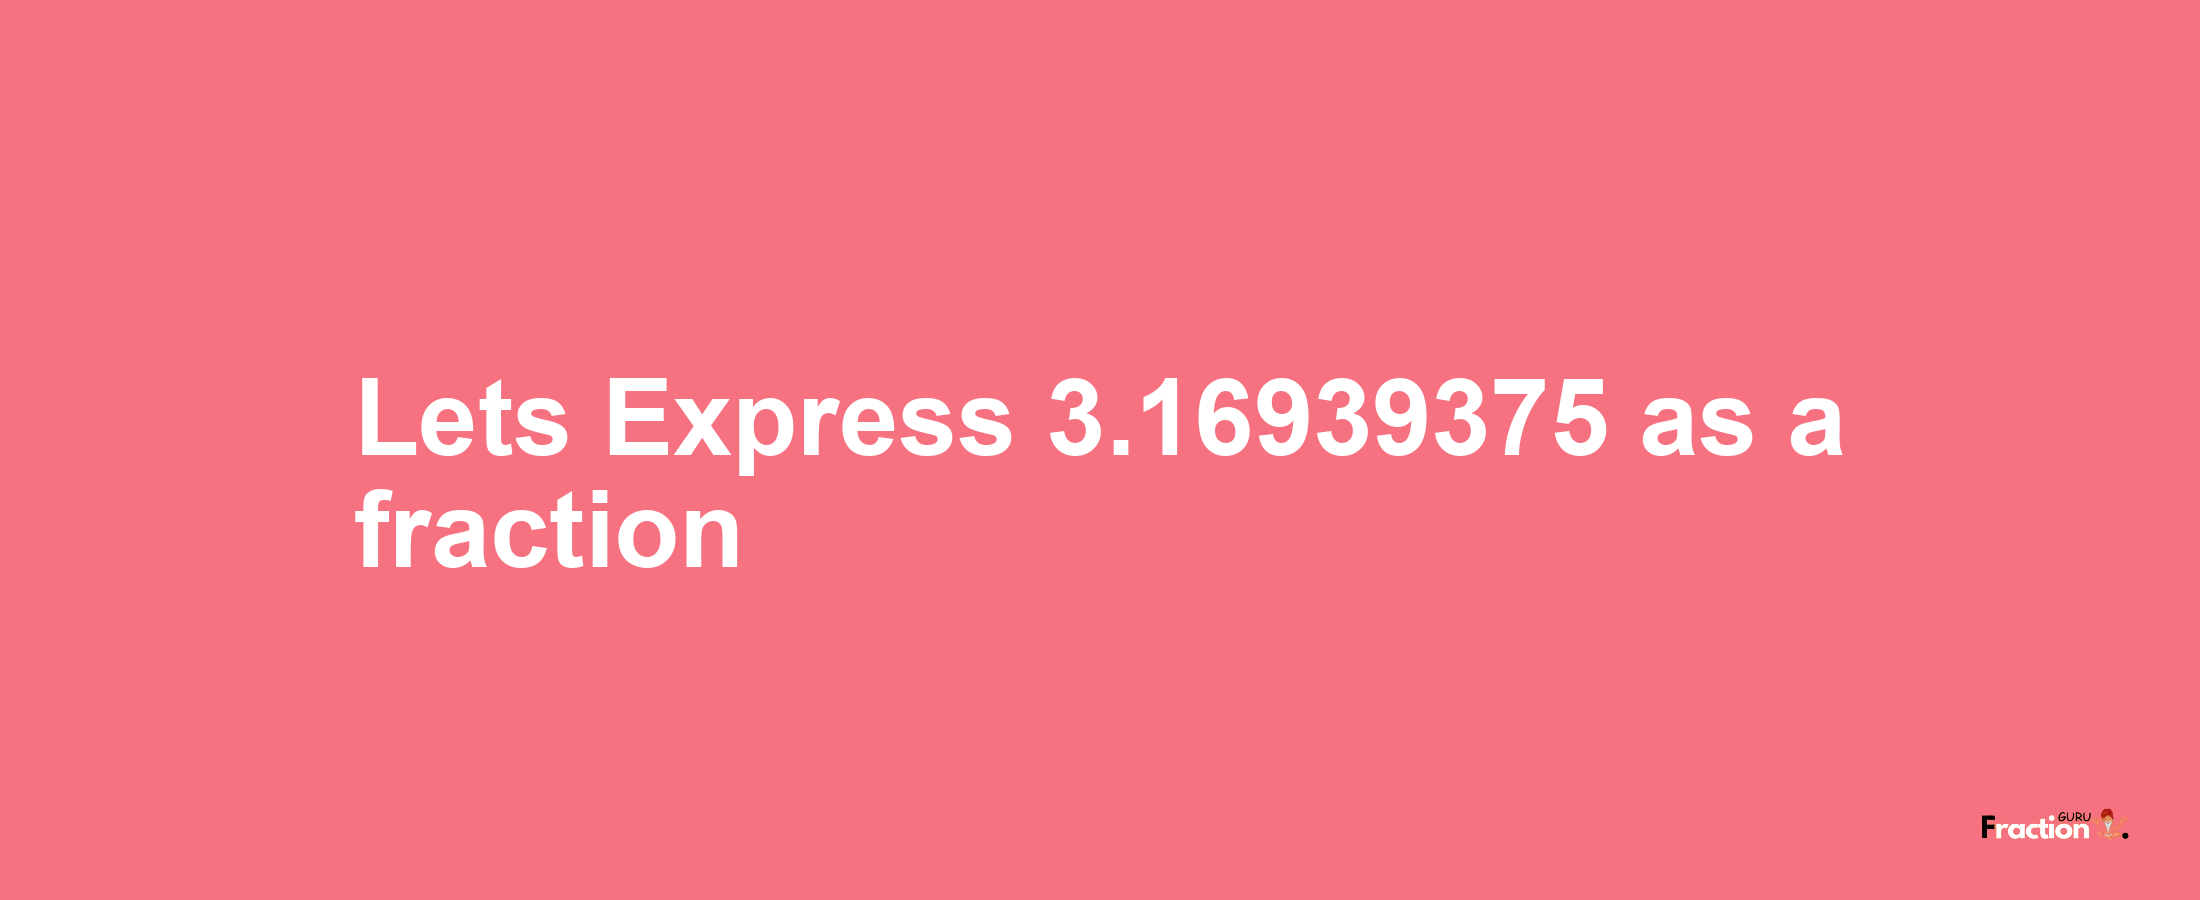 Lets Express 3.16939375 as afraction